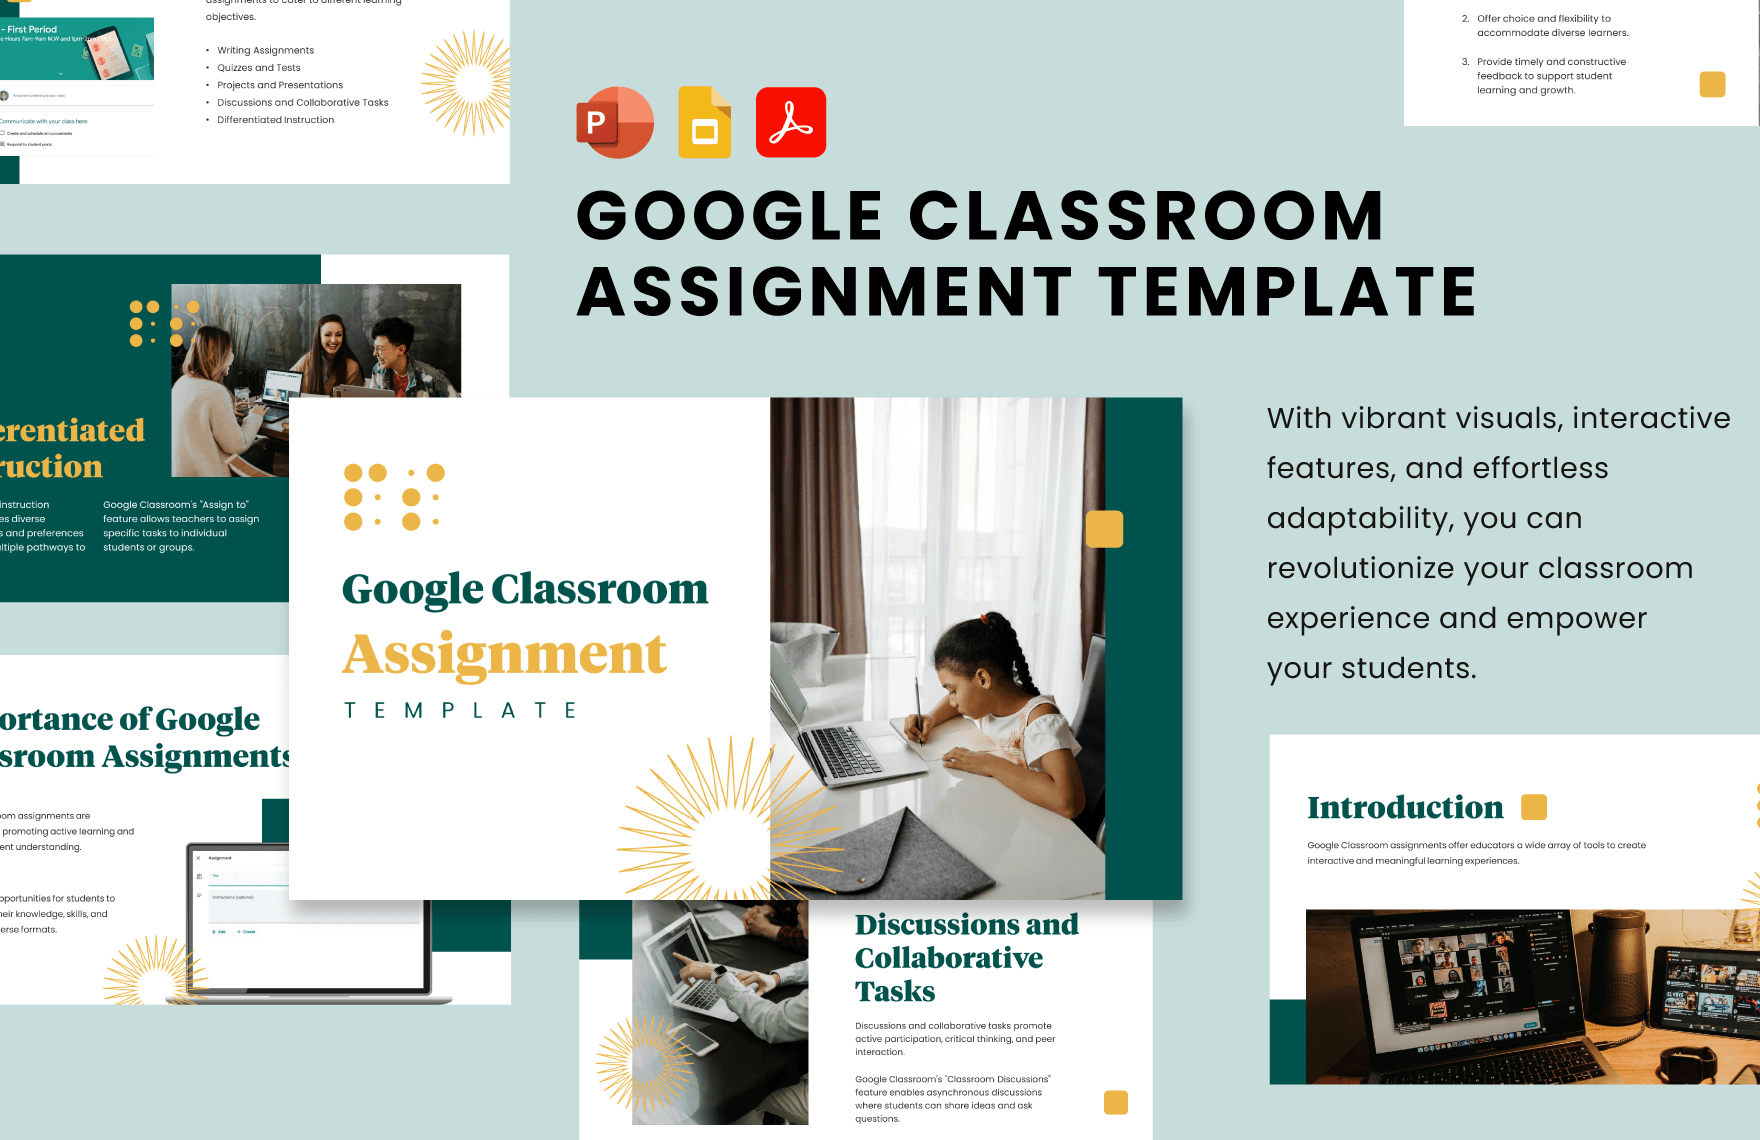 Google Classroom Assignment Template in PDF, PowerPoint, Google Slides